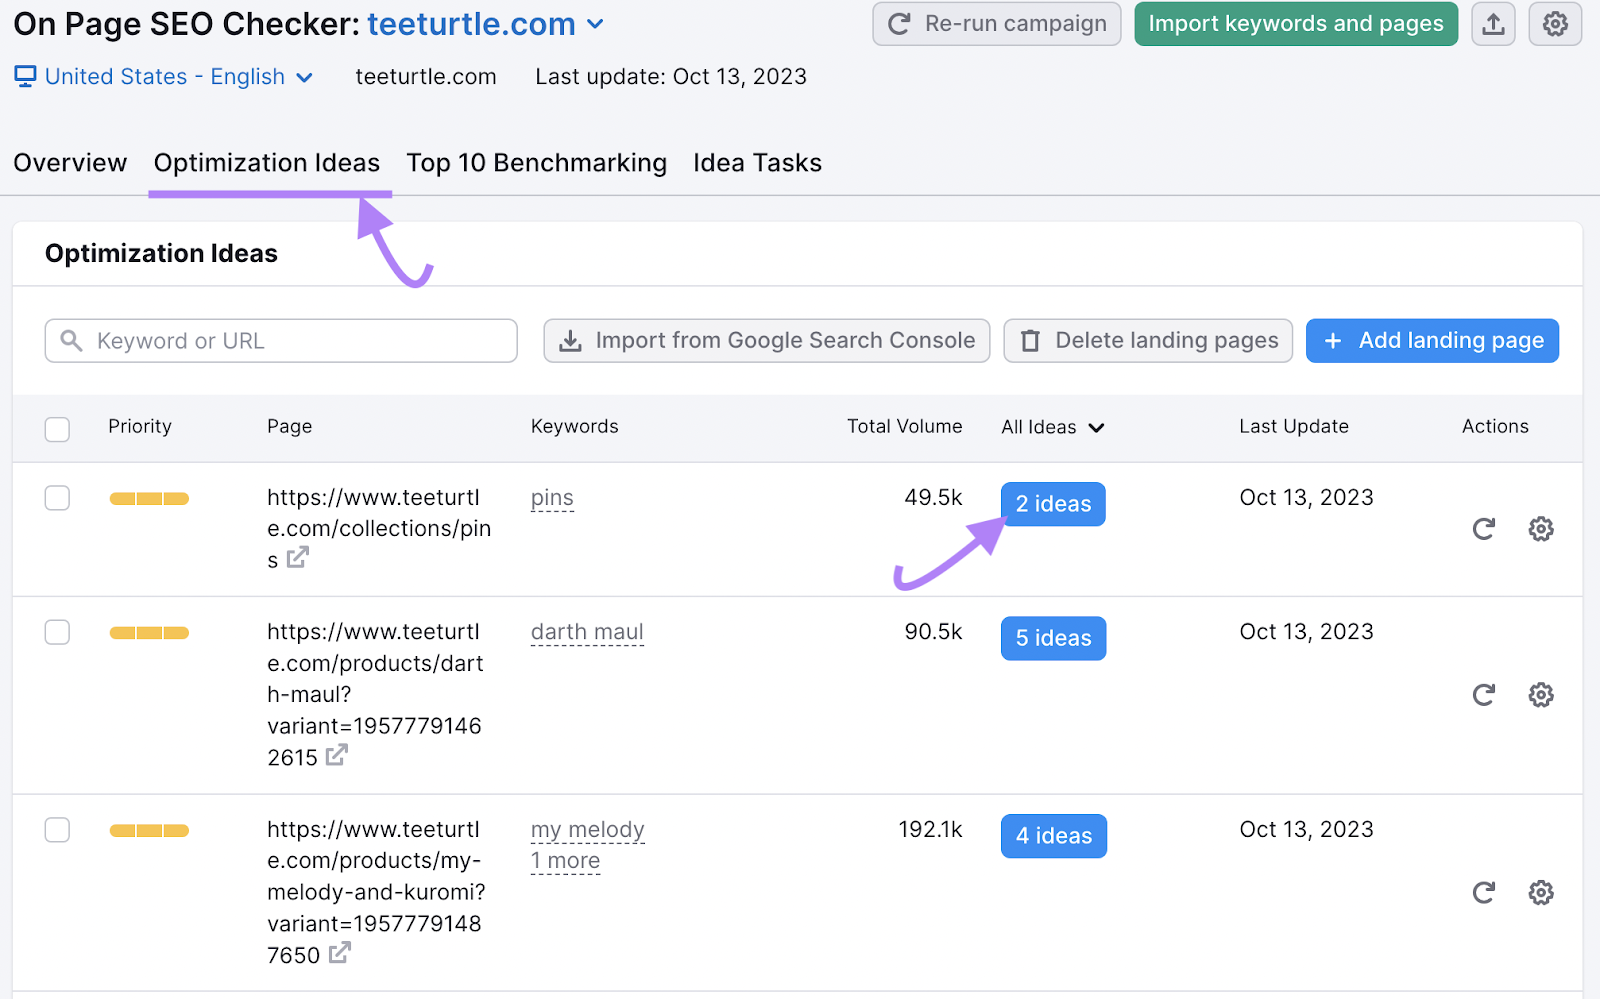 "Optimization Ideas" tab in On Page SEO Checker